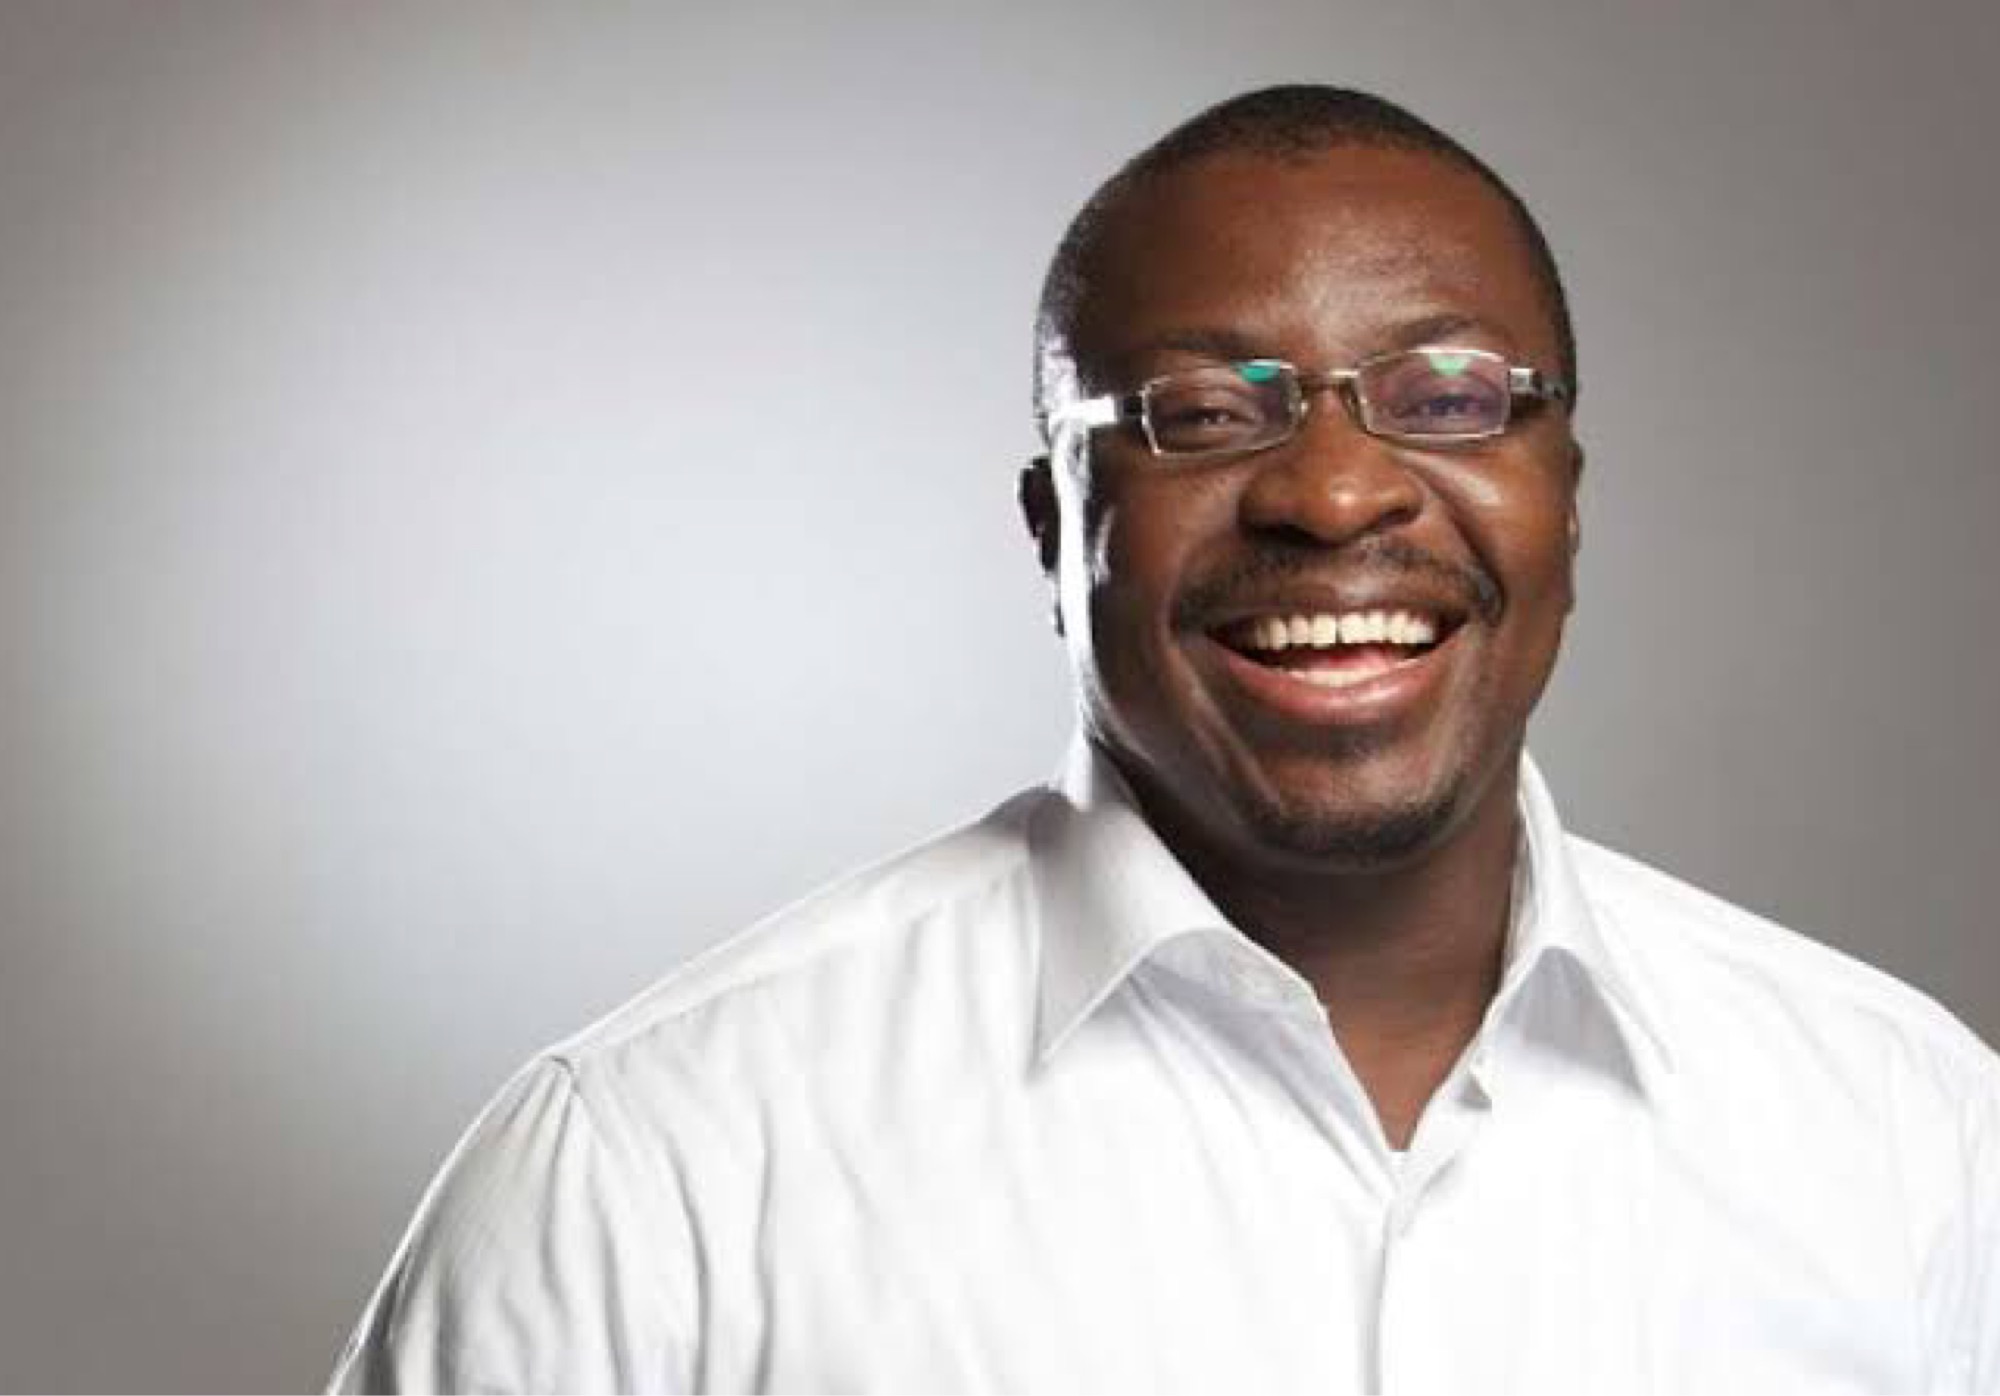 “If Some Nigerian Big Babes Decide To Go Rogue, Even Some Men of God Would Be Affected” - Comedian Ali Baba